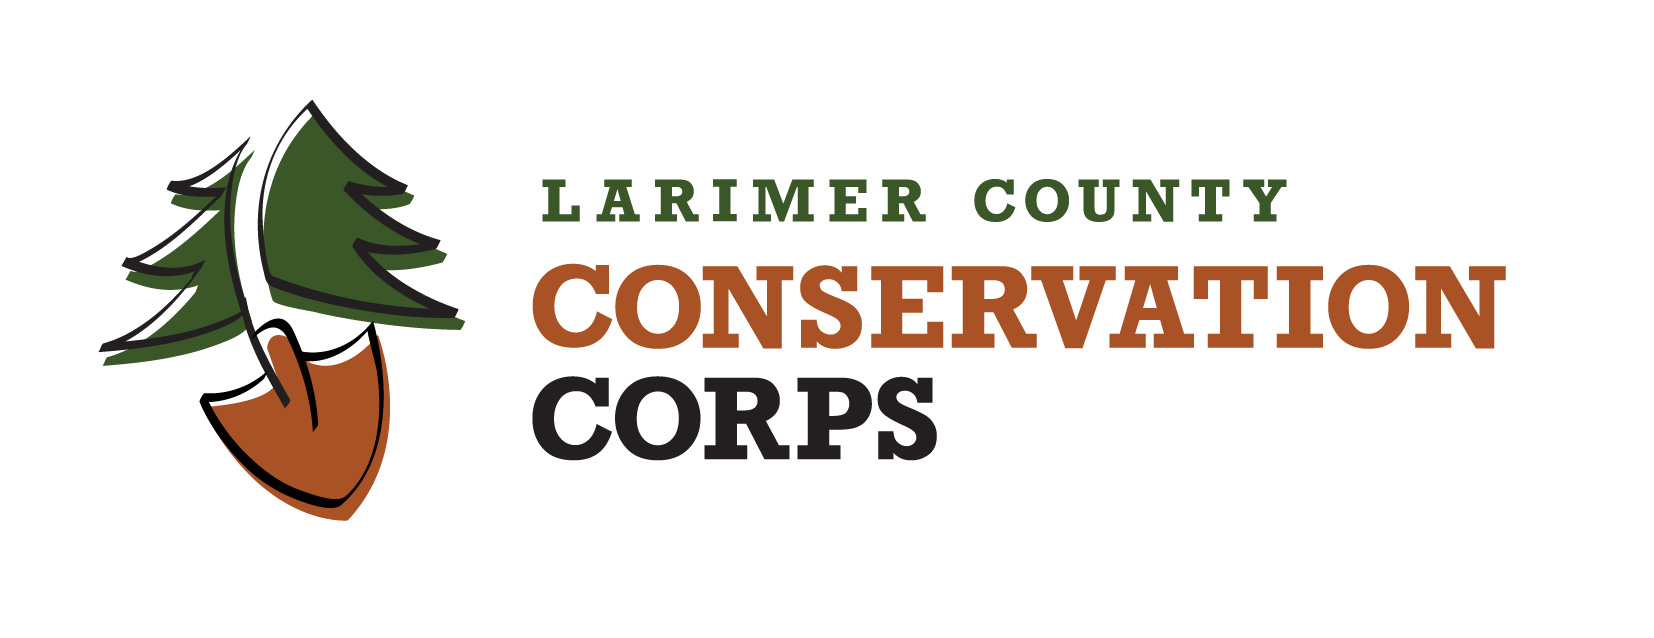 Forestry – Corpsmemeber, Assistant Crew Leader and Crew Lead – Larimer County Conservation Corps